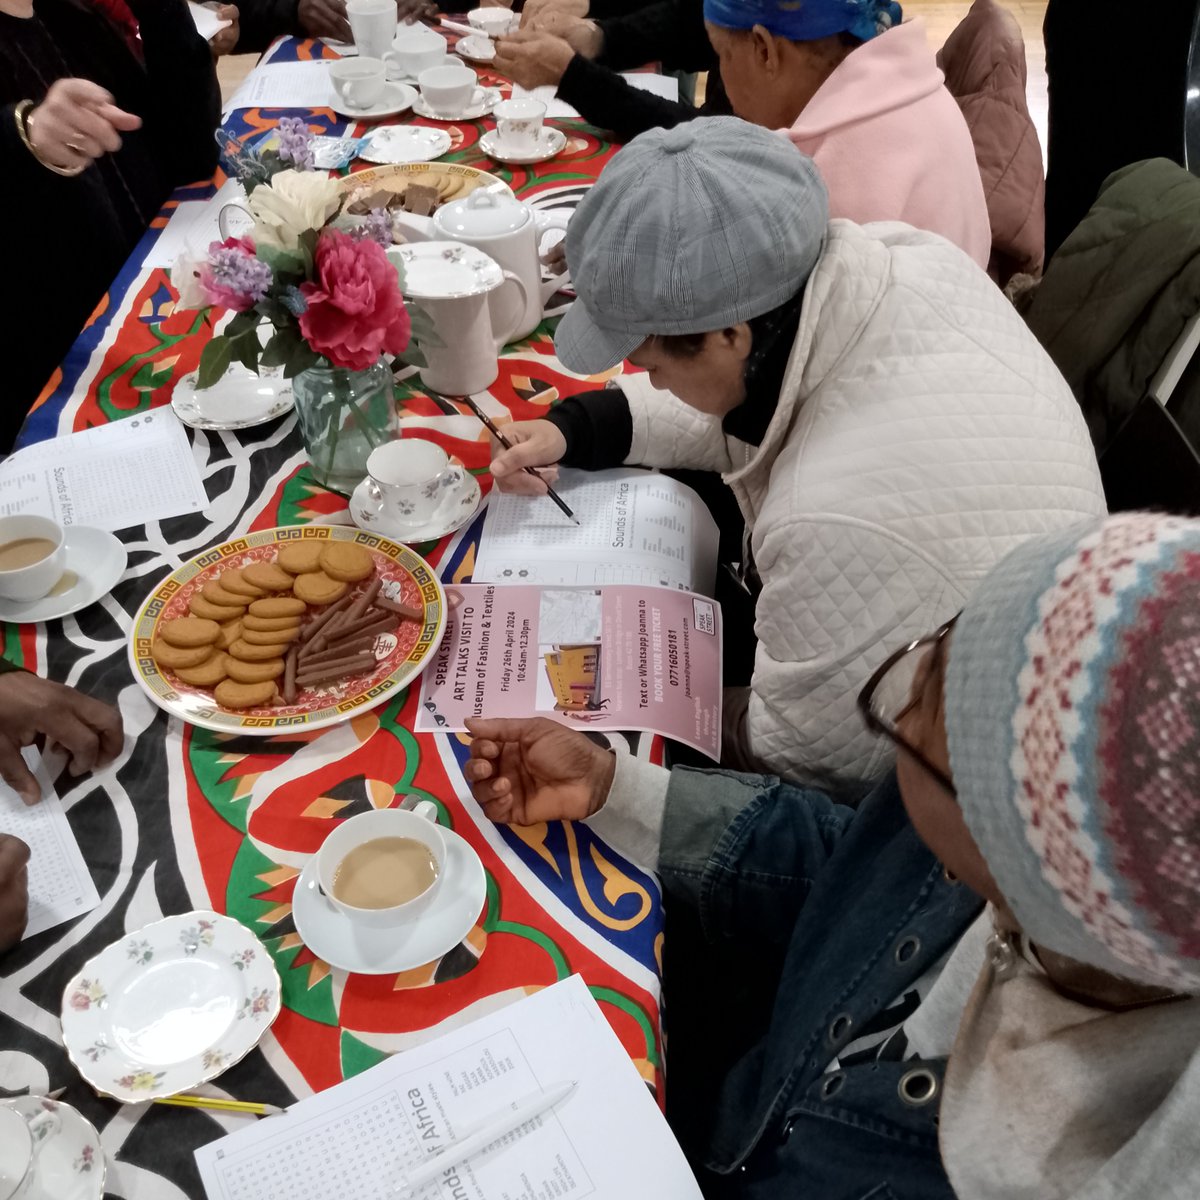 Last week was all about words at our Tea Cosy over 60s social and craft club with word searches, word games, and of course tea and biscuits! Every week the Tea Cosy club gathers to craft and socialise over tea as well as learn from visiting workshops such the Wallace Collection.